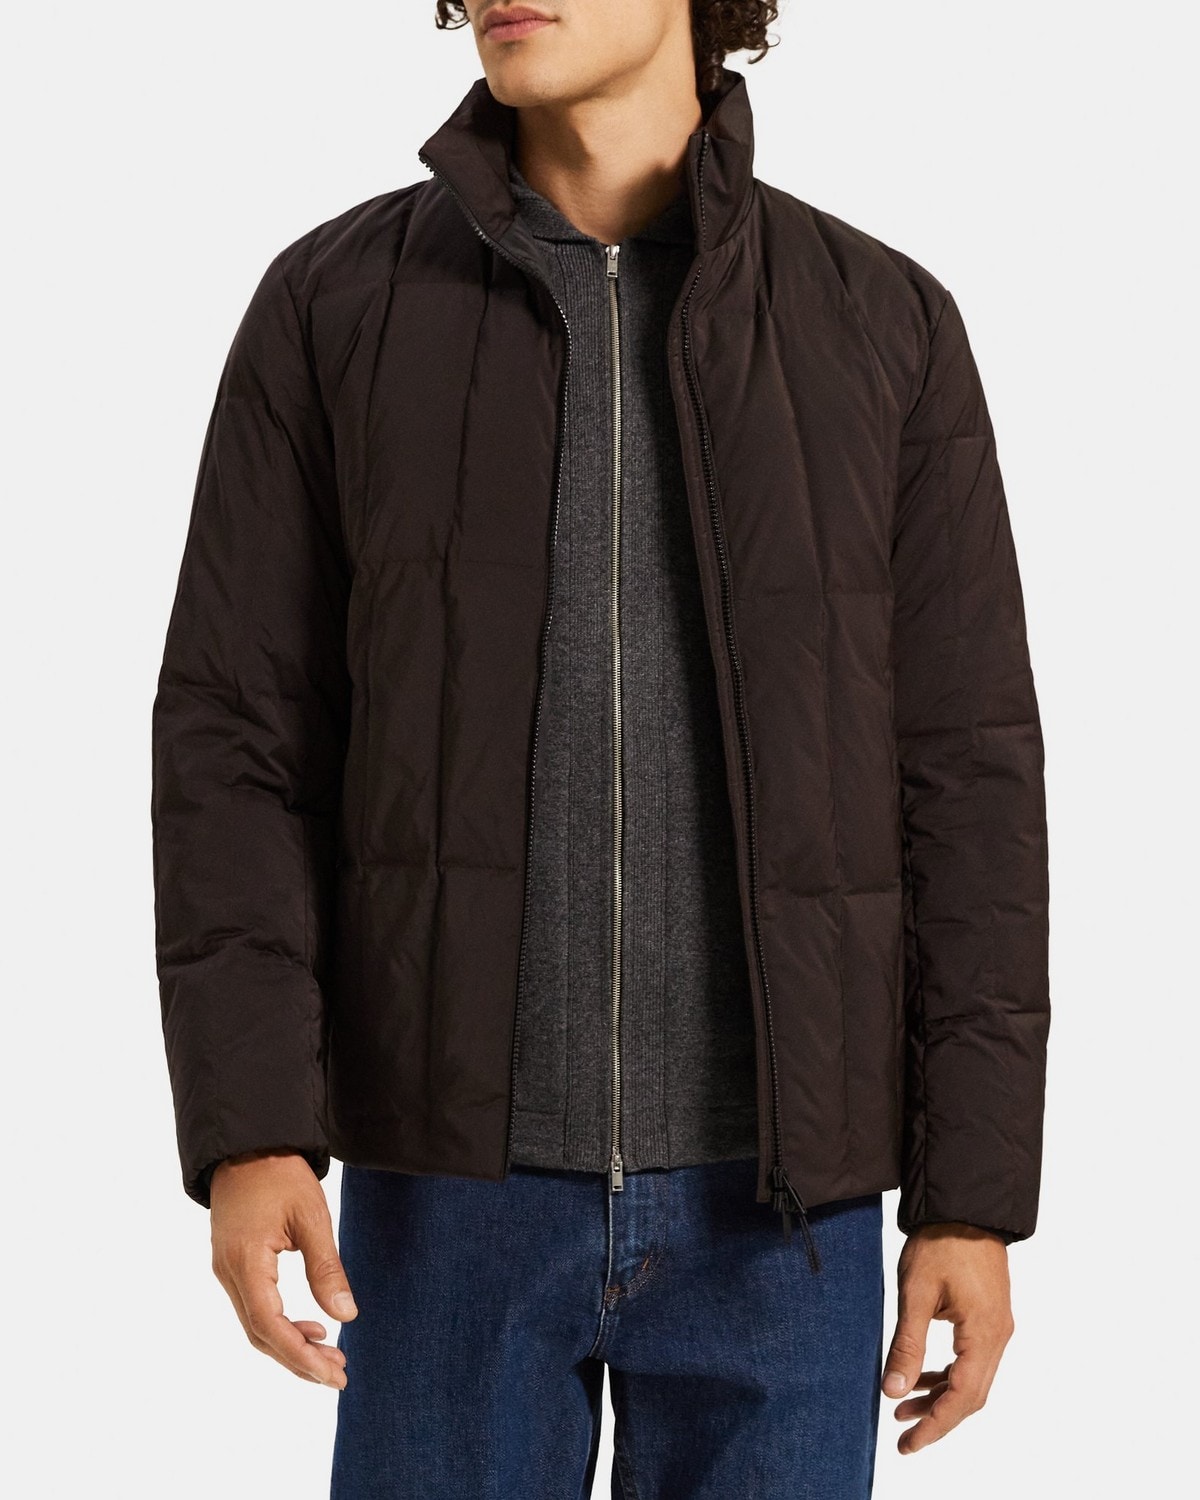 Puffer Jacket in City Poly